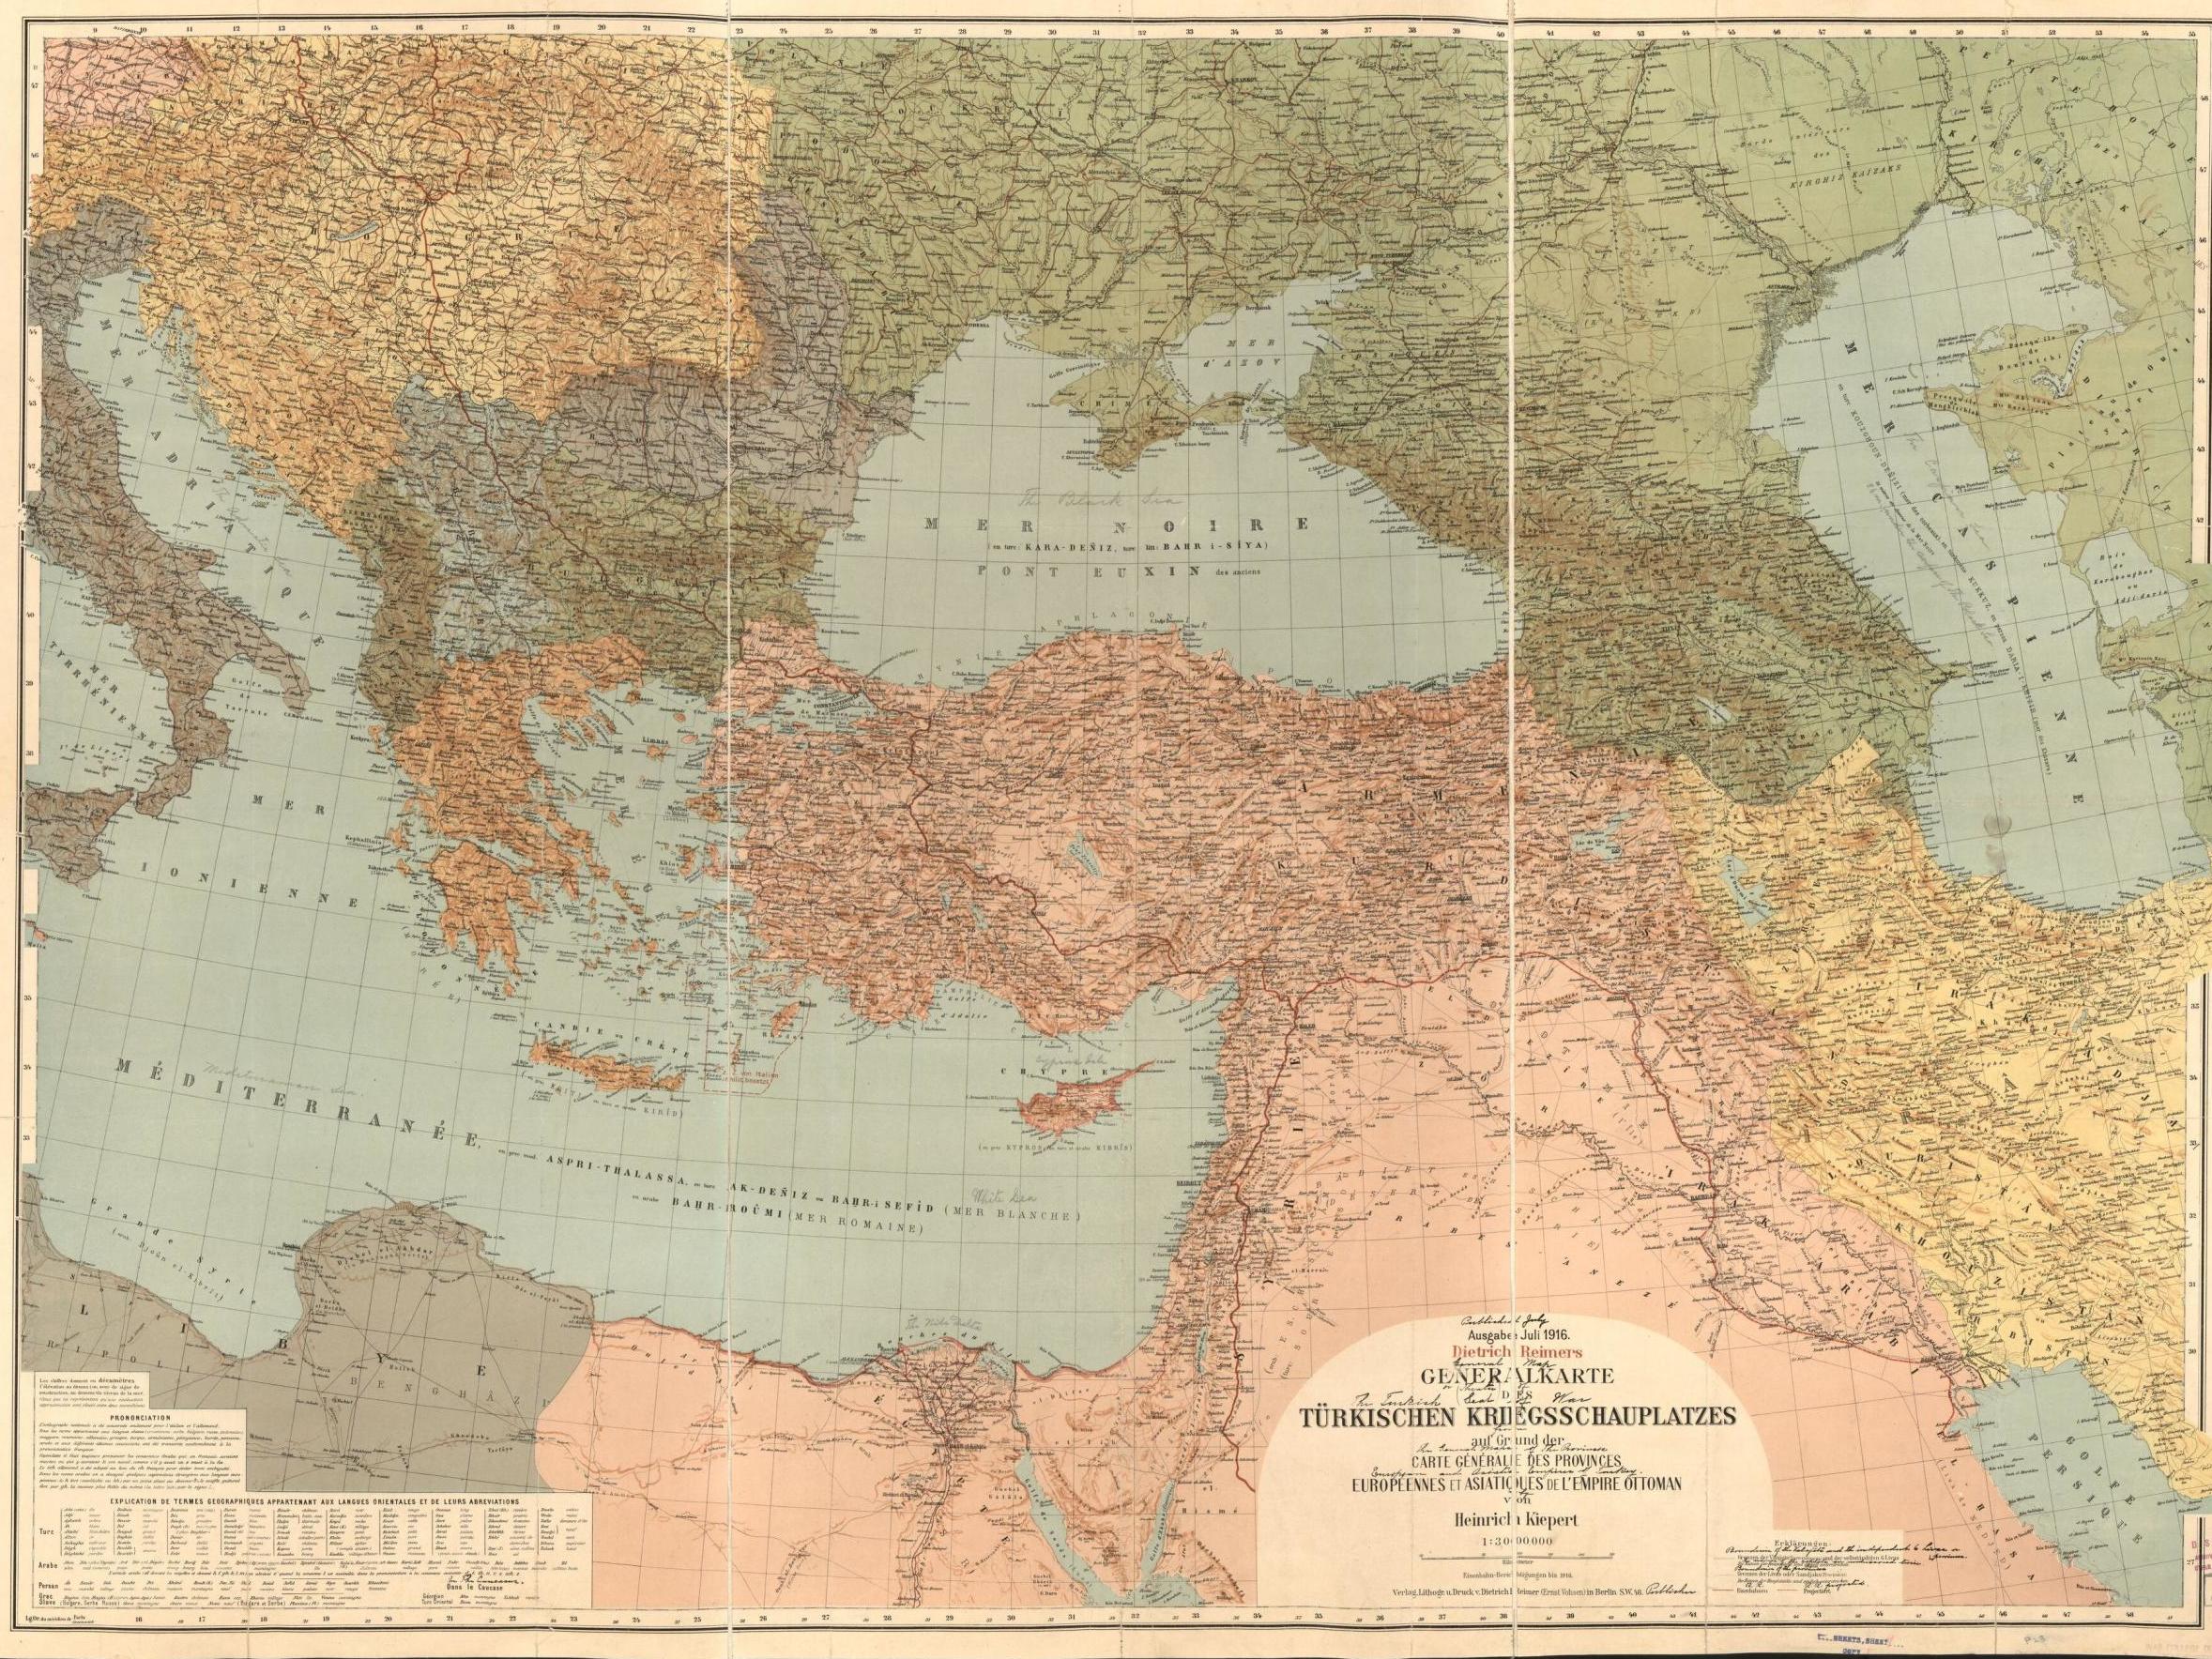 Heinrich Kiepert’s map of the Middle East from 1916